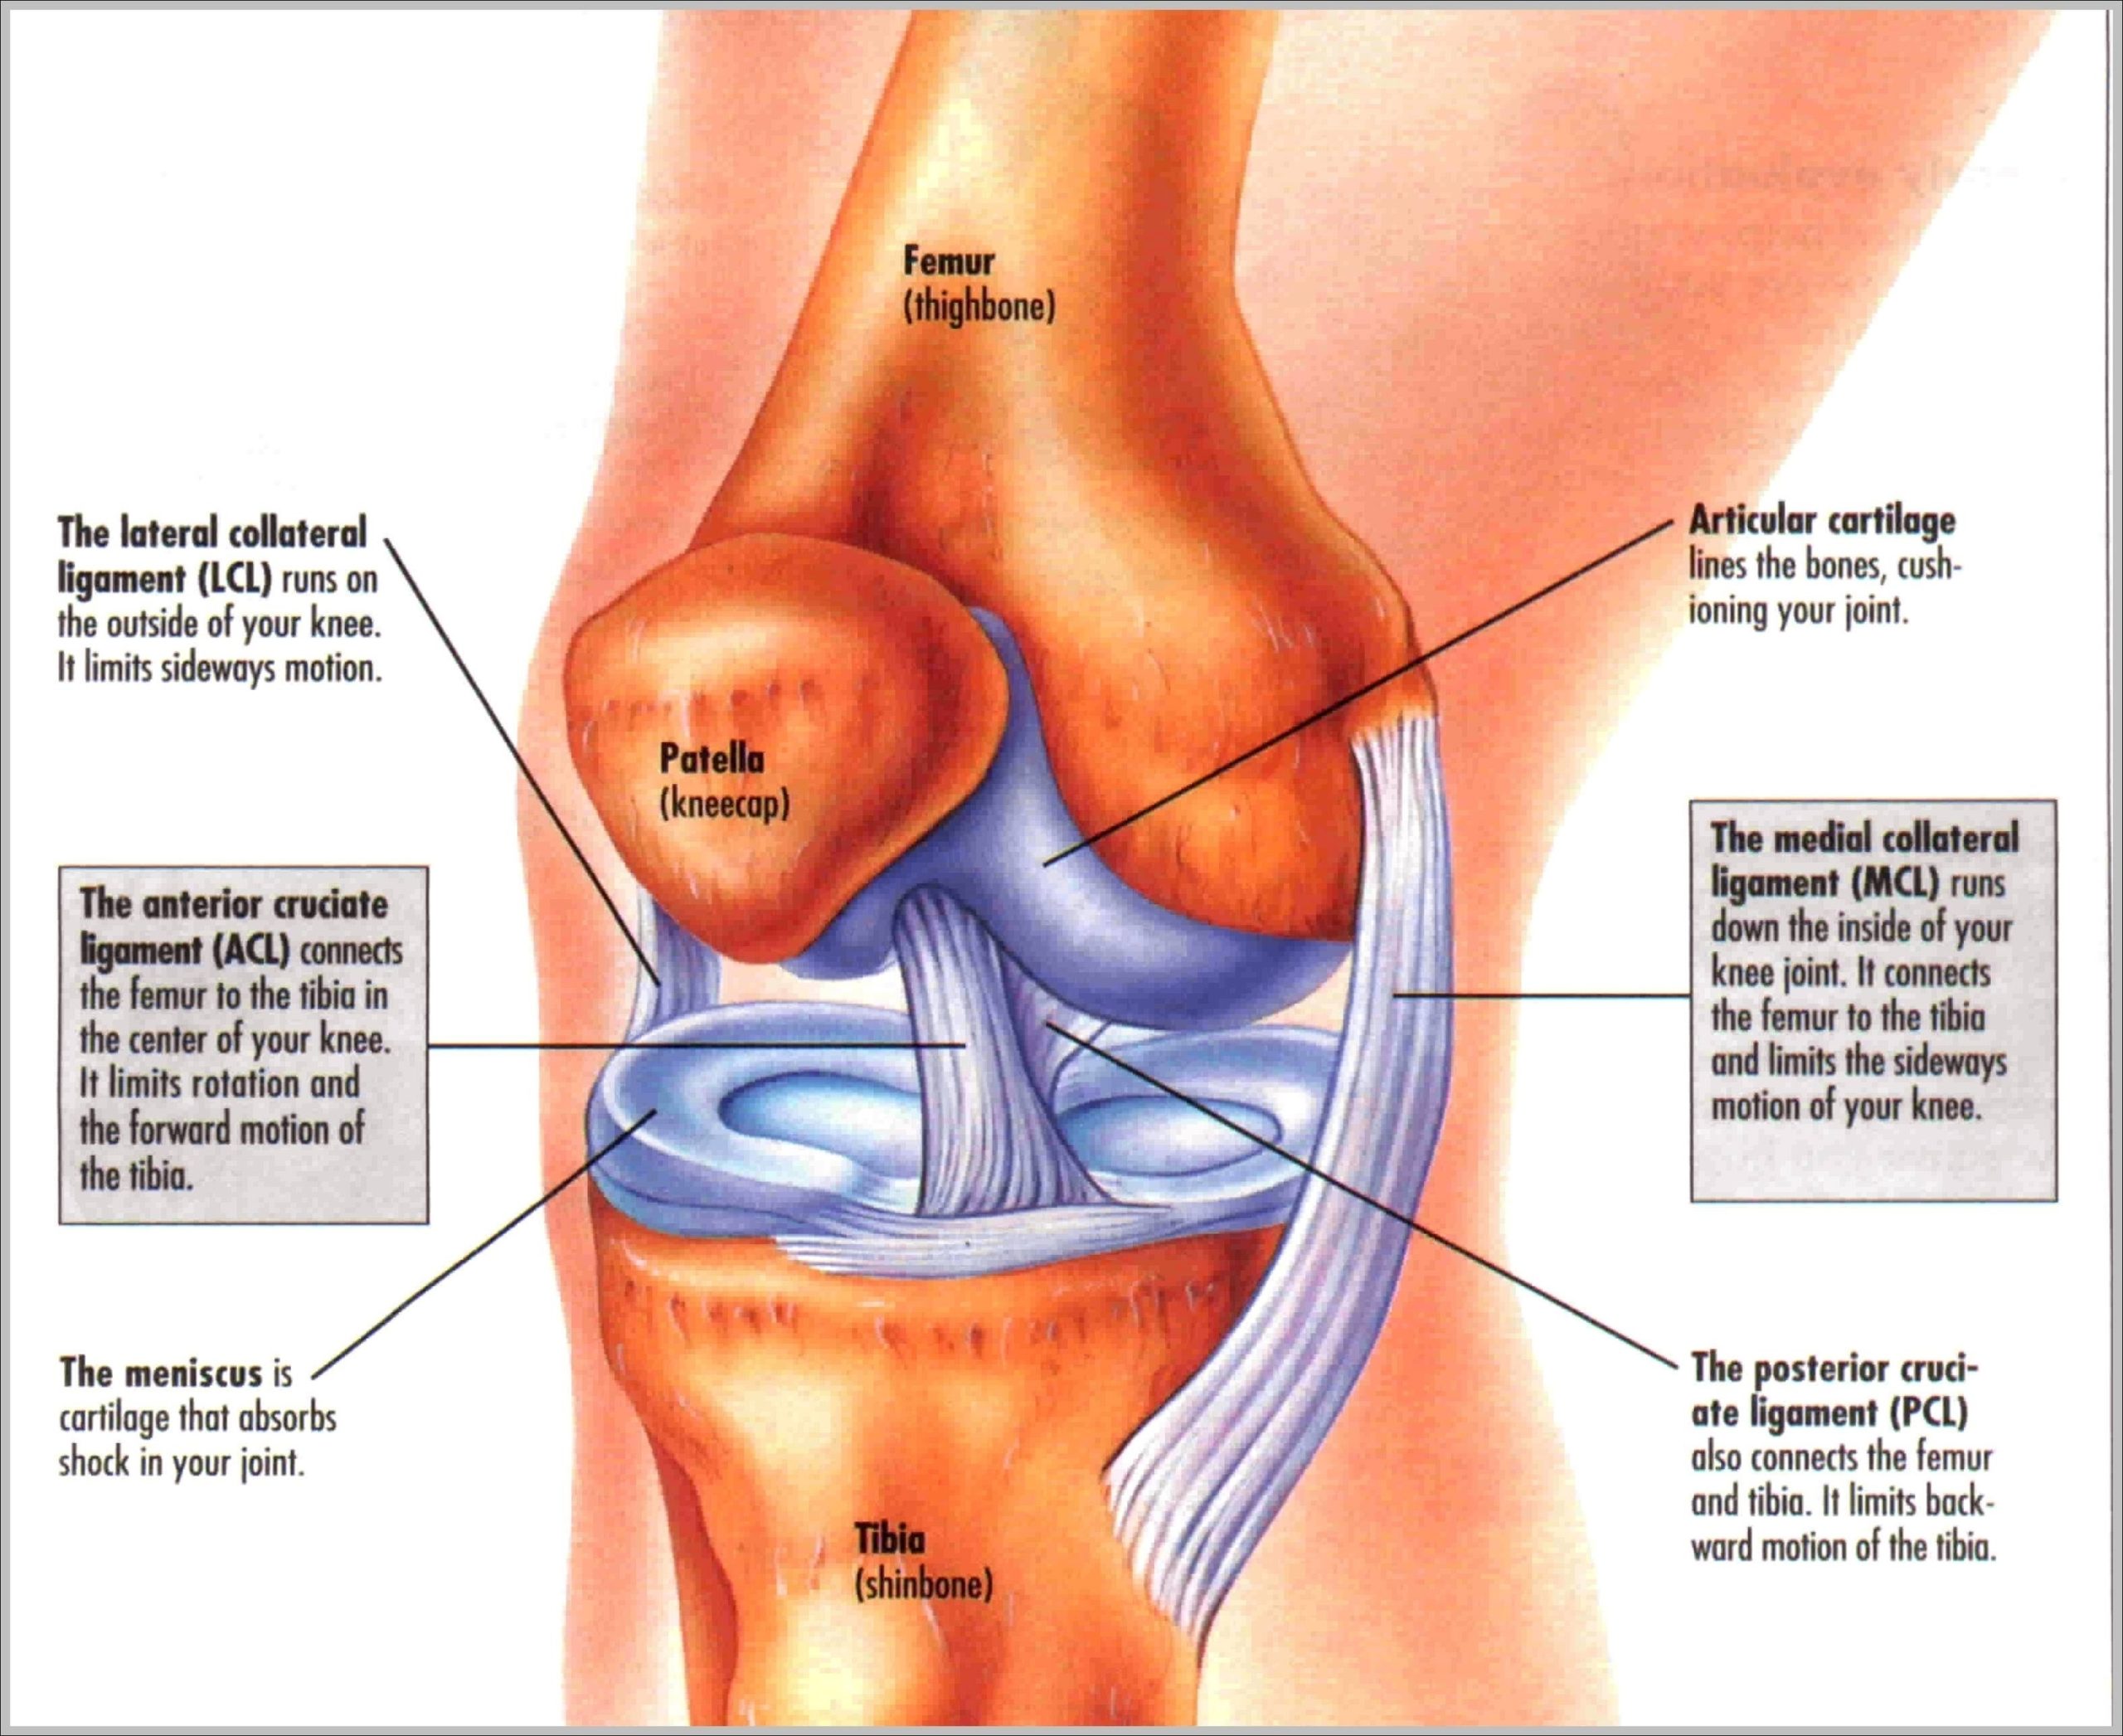 Knee Pictures Of Anatomy Image scaled